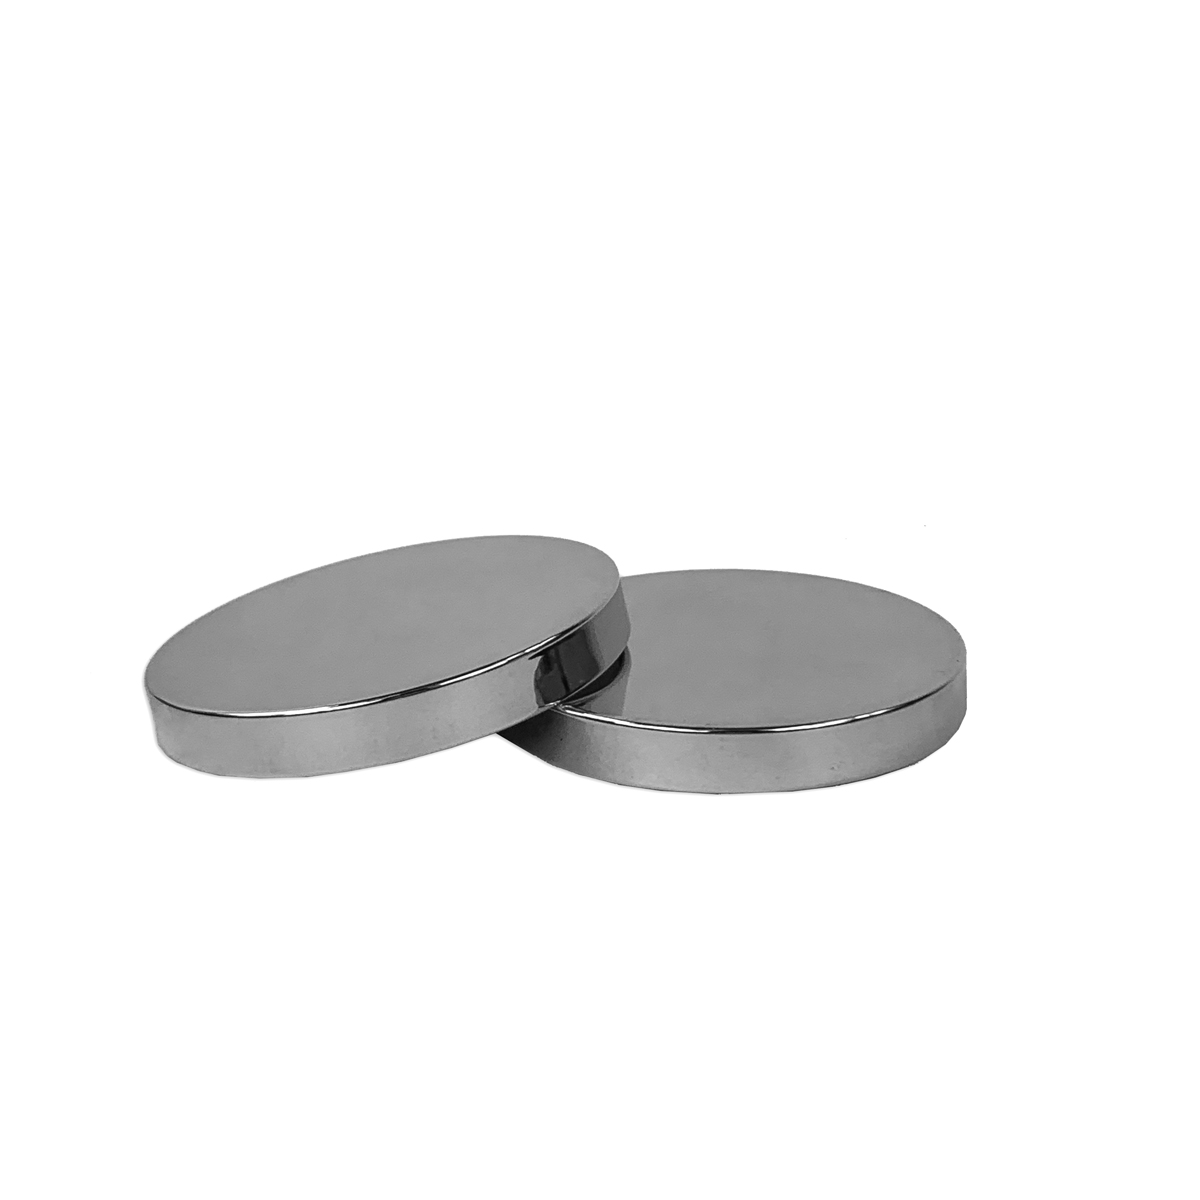 7 oz. Bayside Silver Candle Lids